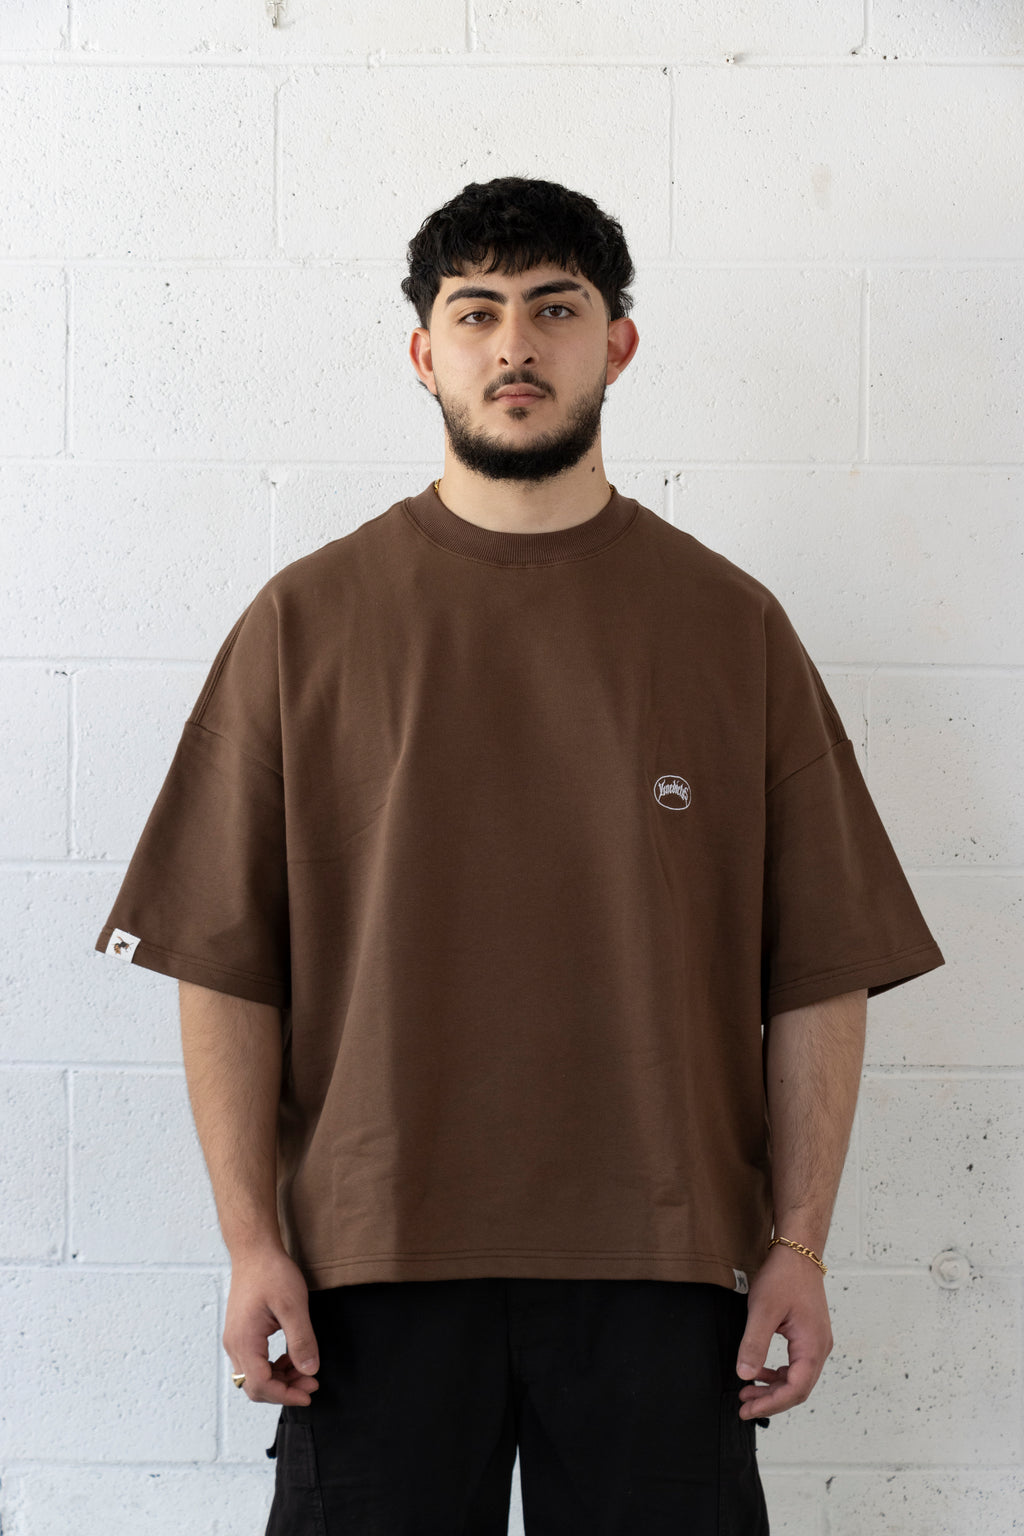 Stamped Mountaintop Tee - Brown